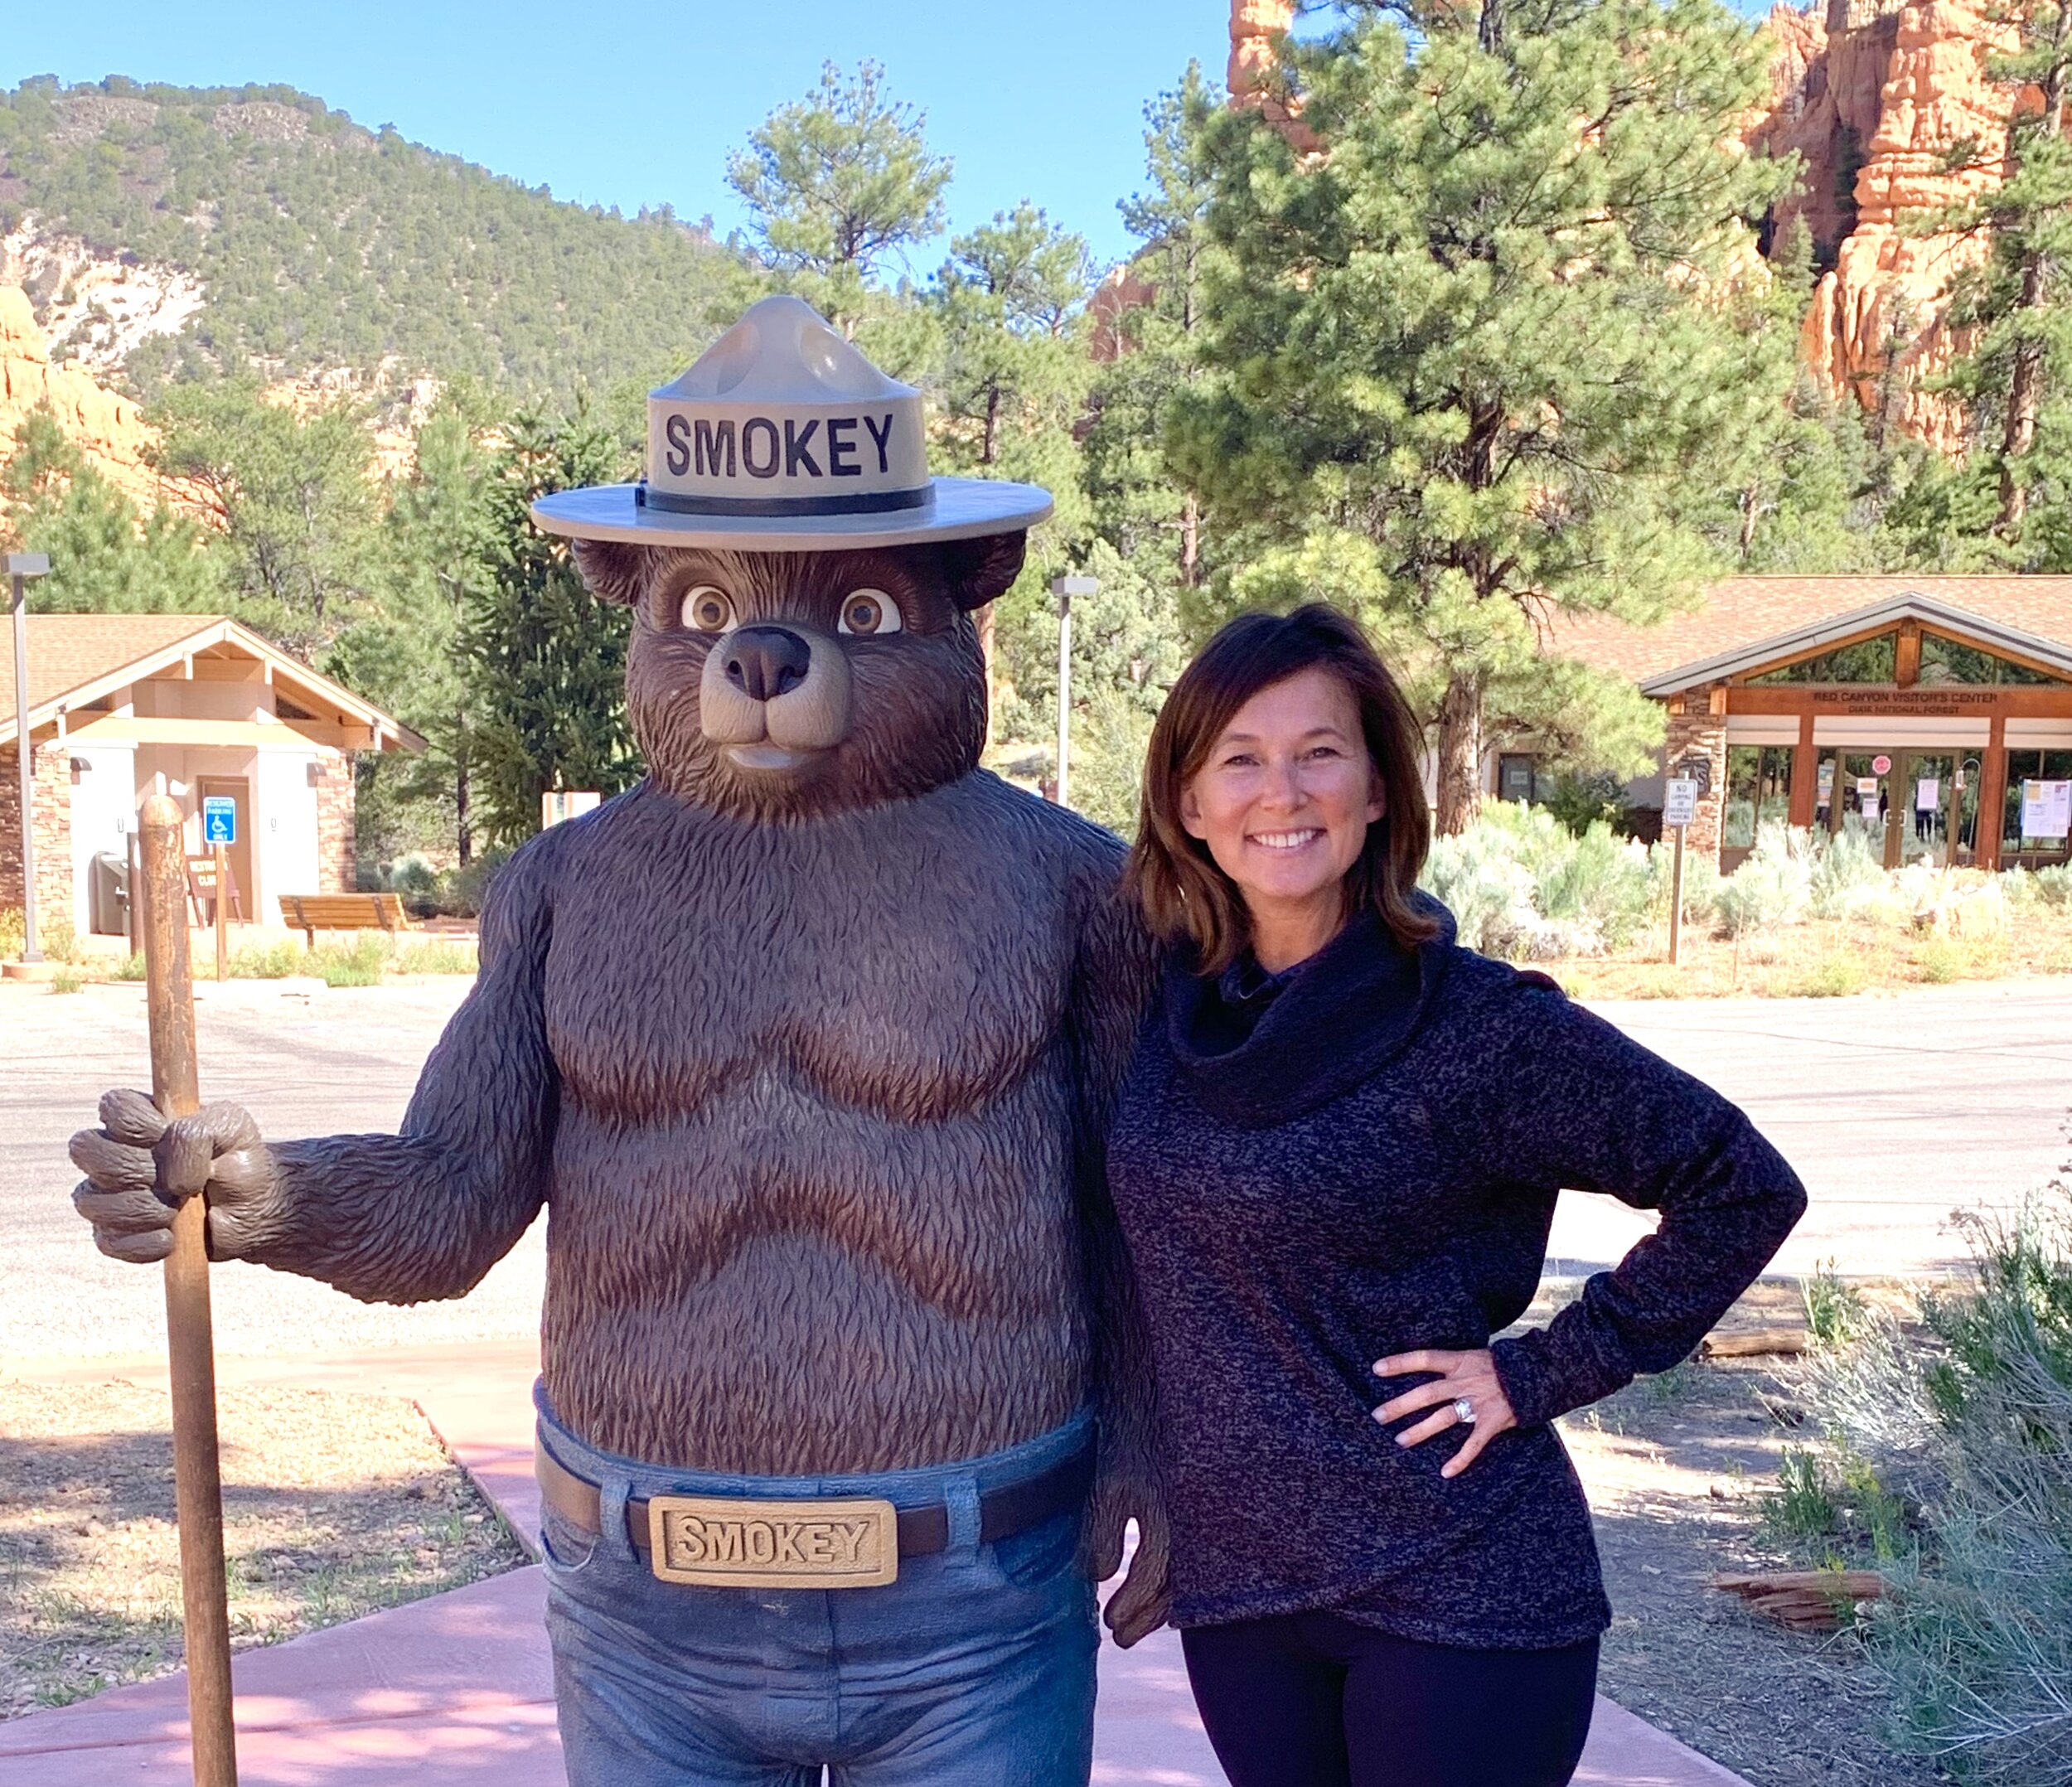   Did you know Smokey Bear’s fire prevention campaign is the longest running public service announcement in U.S. history? His career began in 1944 with the slogan: “Smokey says—Care will prevent 9 out of 10 forest fires”. In 2001 His slogan was chang